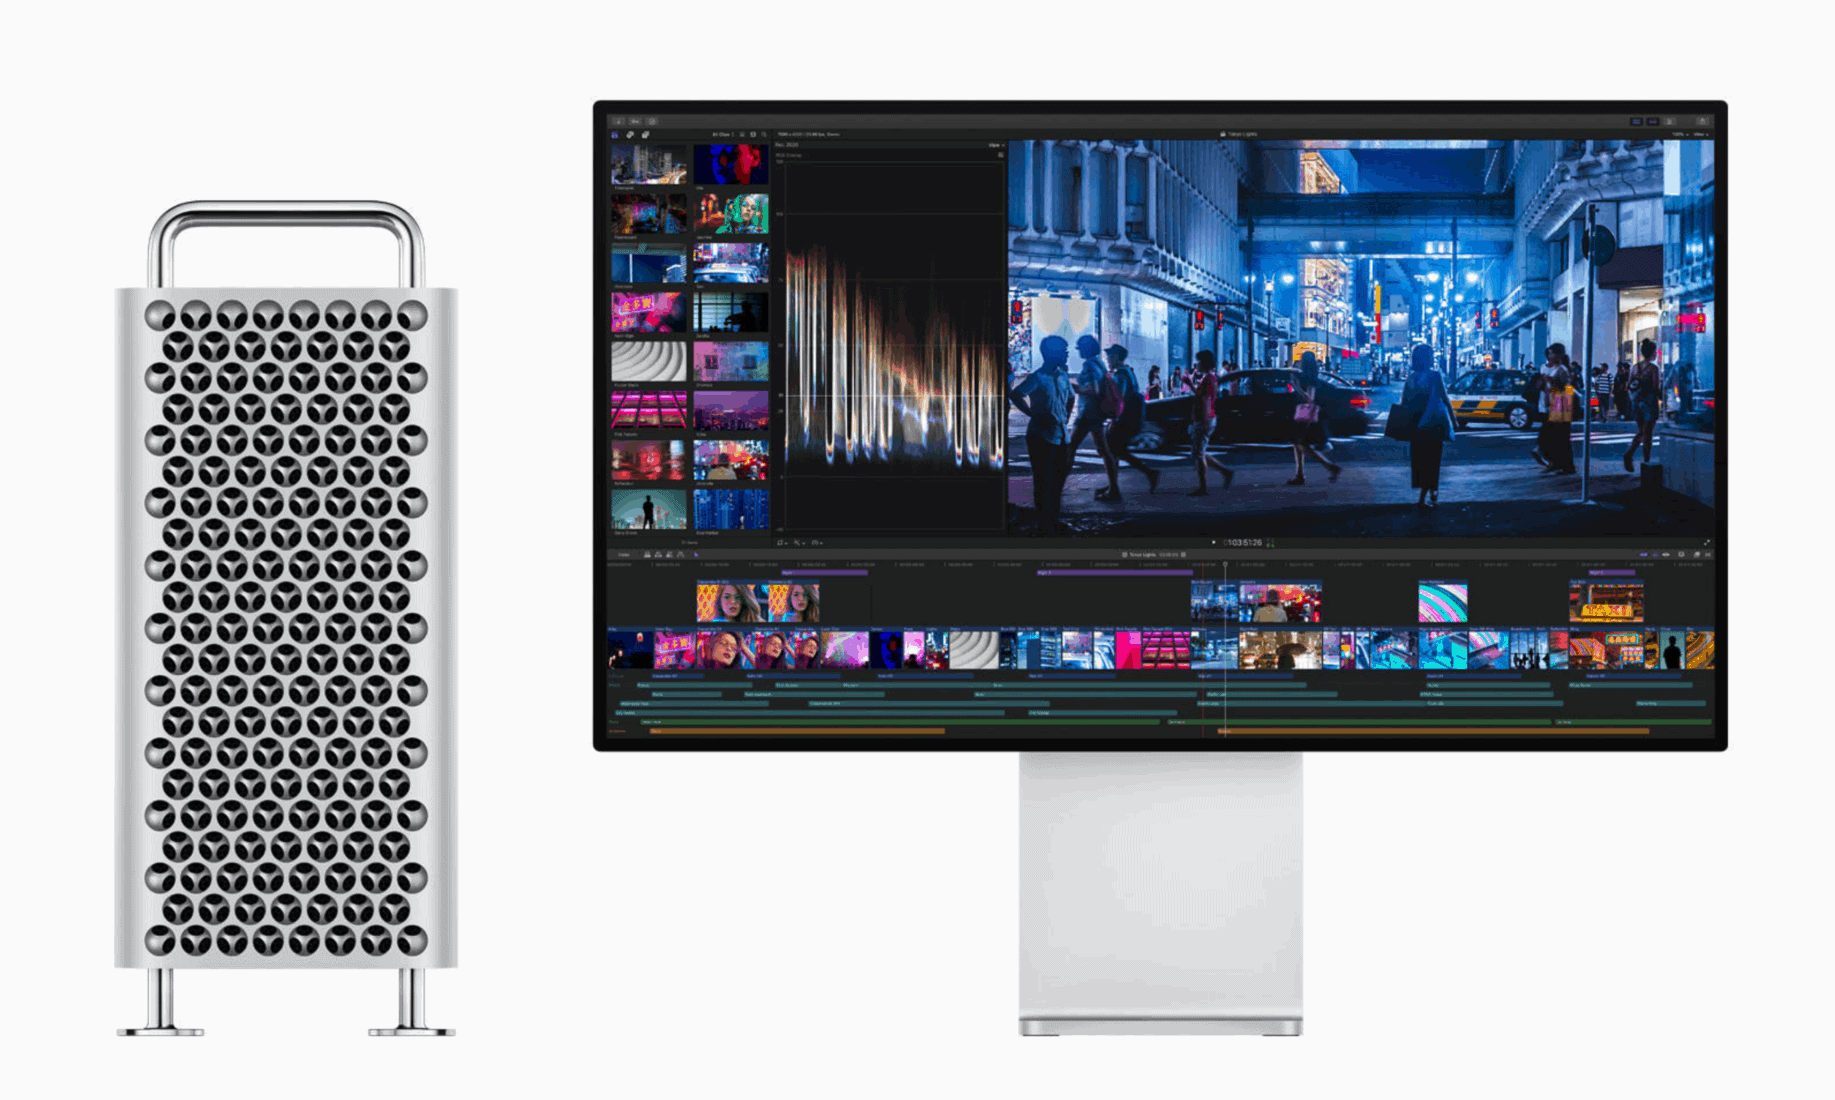 Apple's new Mac Pro desktop computer is (very) expensive, highly ...